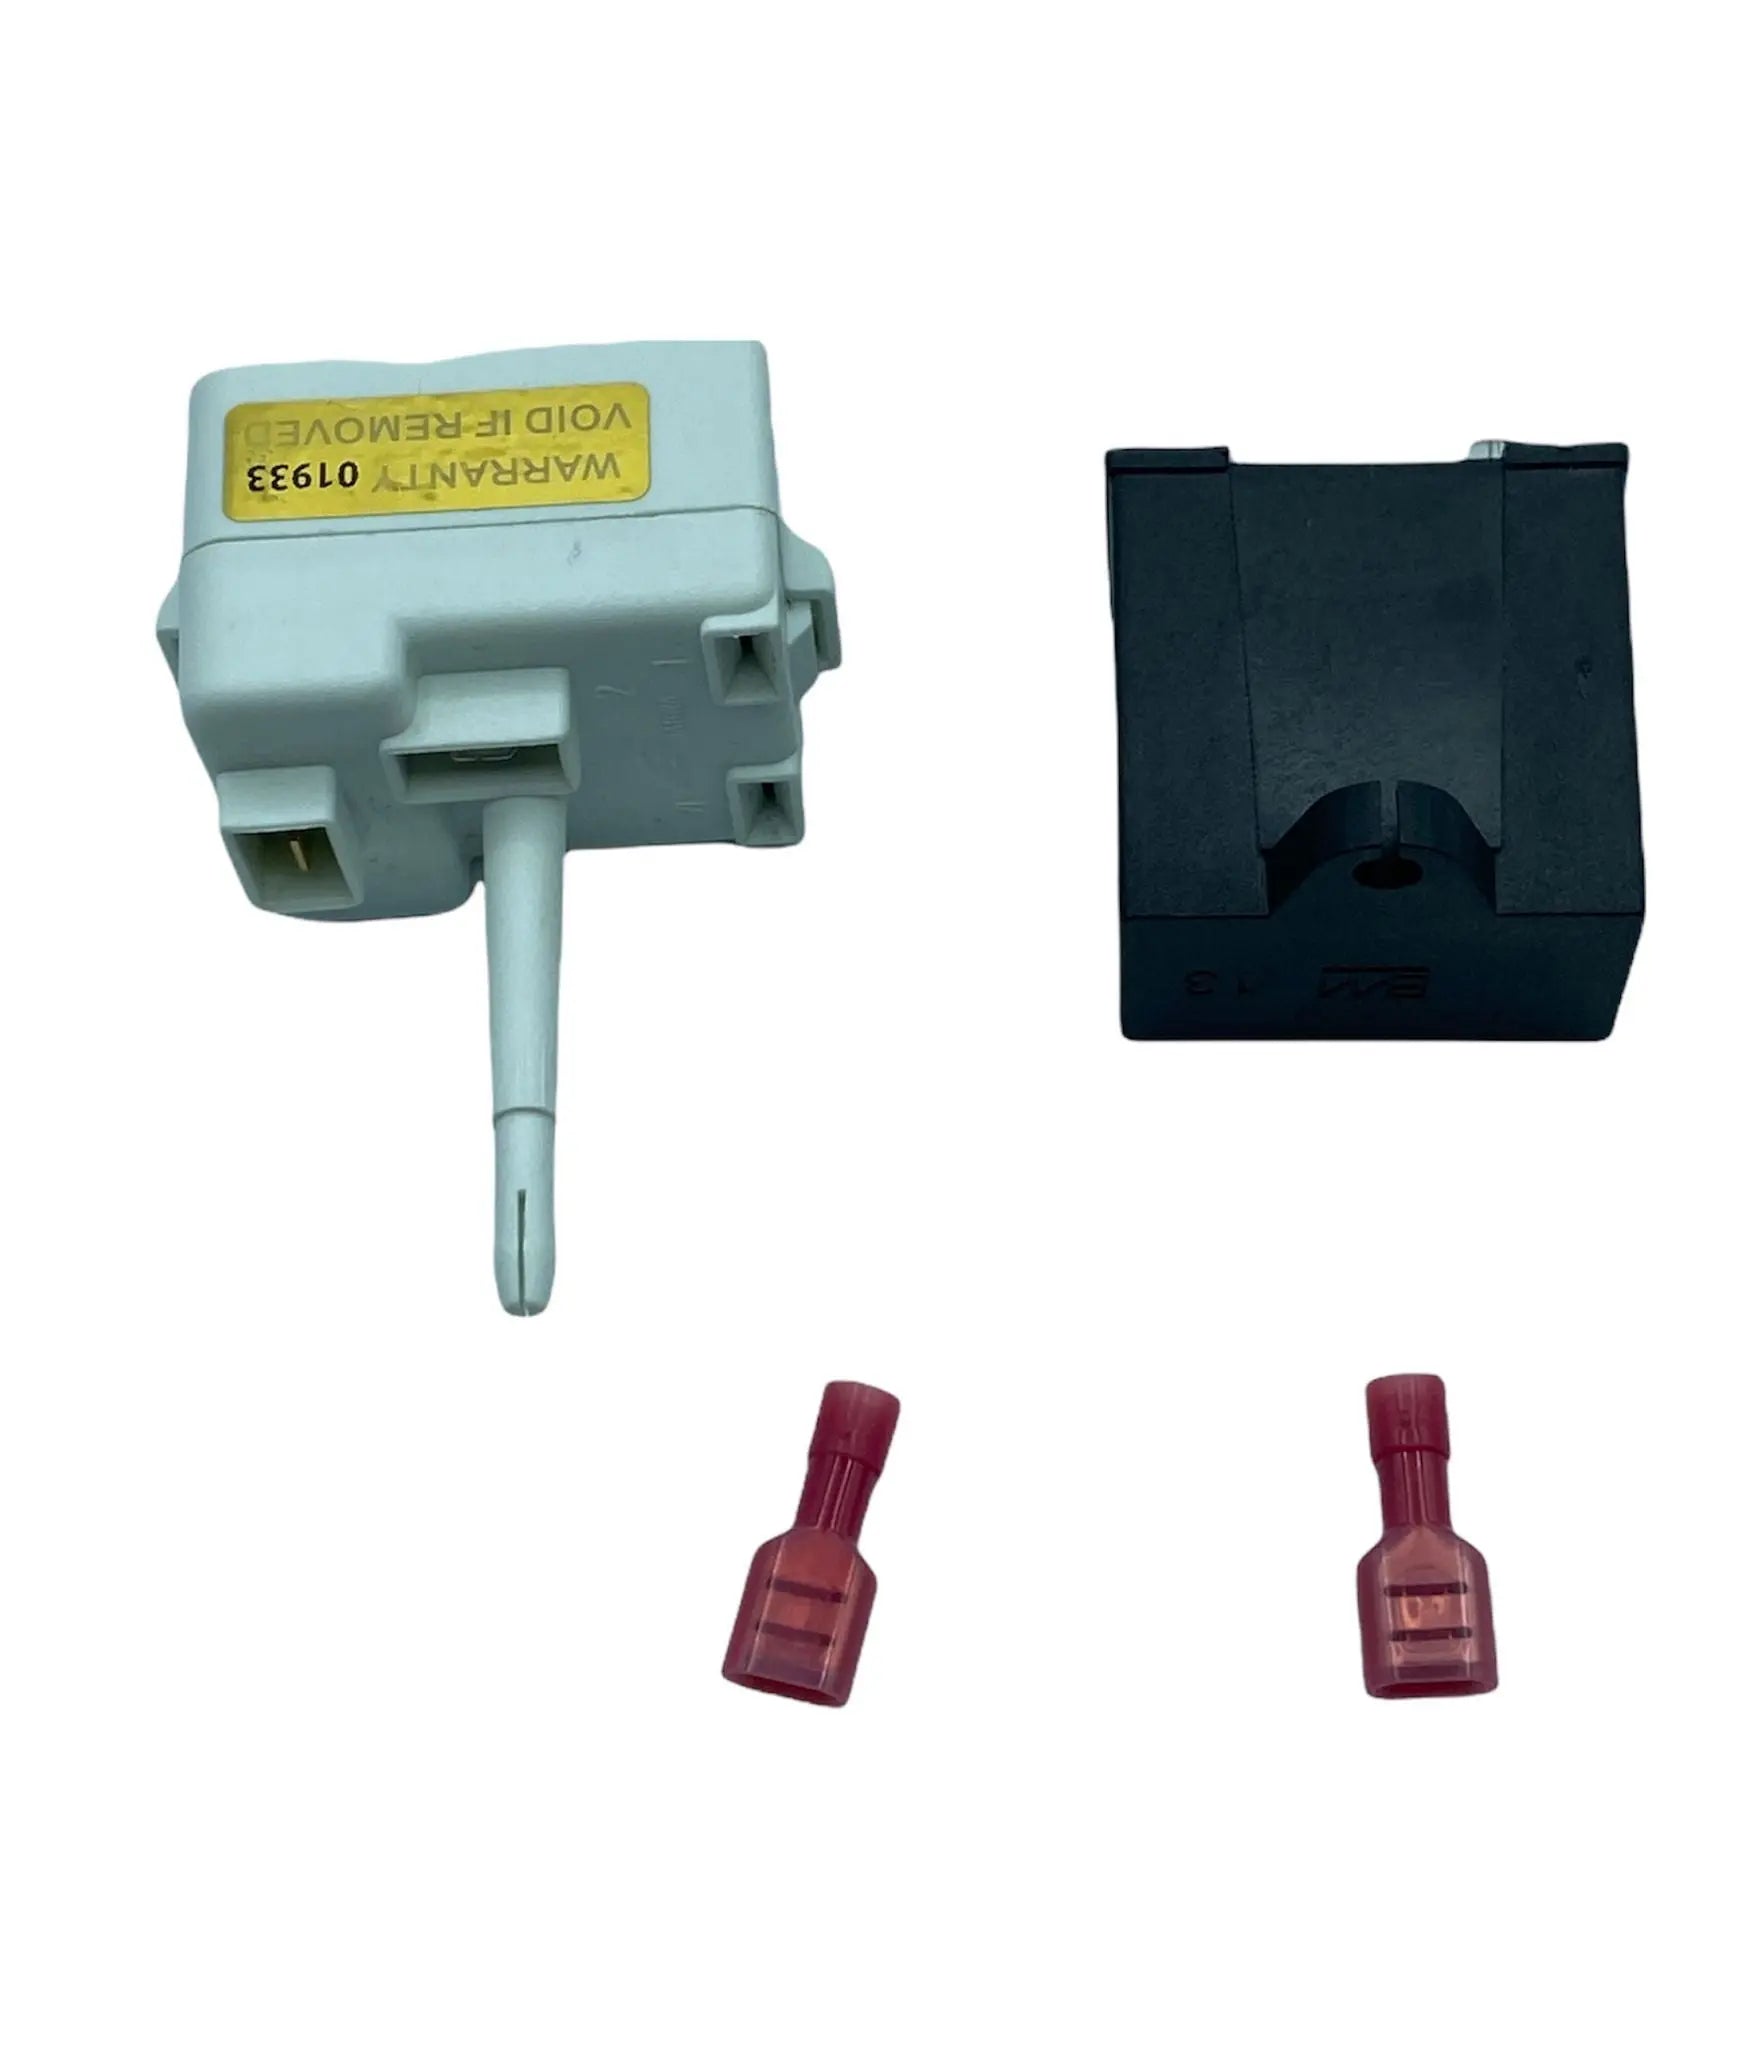 G.E Refrigerator Start Device Kit - WR07X10143 or WR01F01682, REPLACES: 1812125 AH2577843 AP4538935 EA2577843 EAP10055909 EAP2577843 PS2577843 WR07X10143 PD00051509 INVERTEC